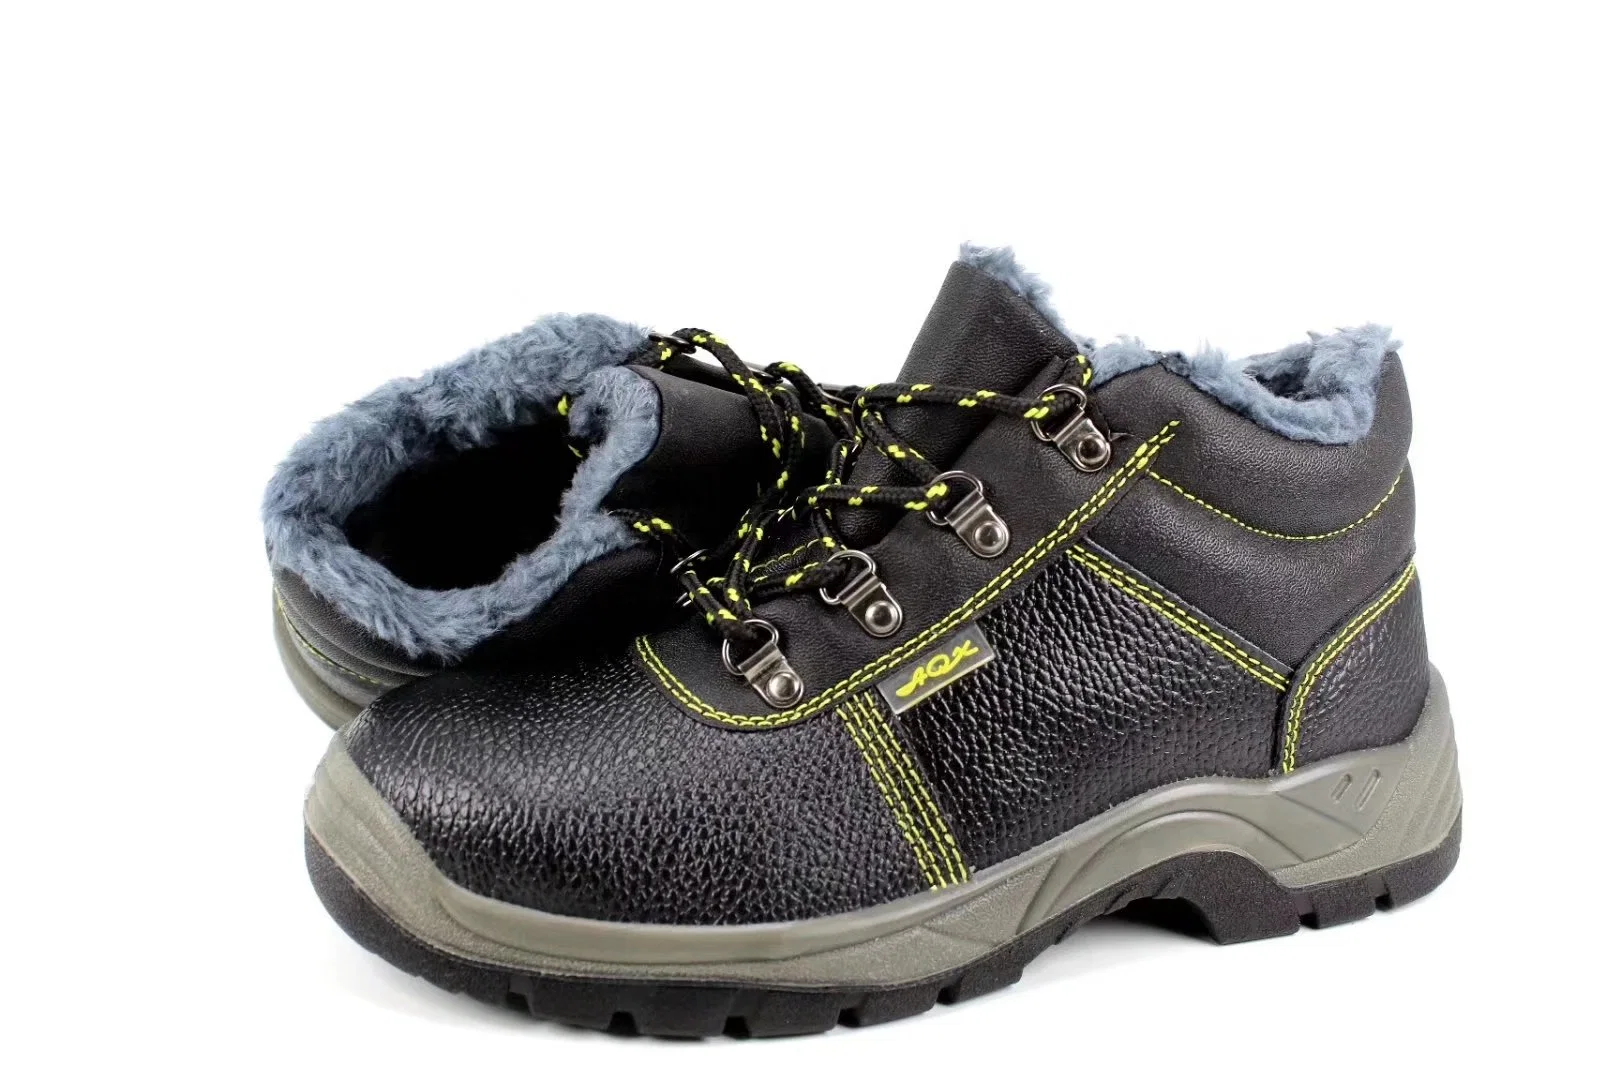 Fashion Winter Work Shoes / Warm Shoes/Steel Toe Cap Safety Shoes